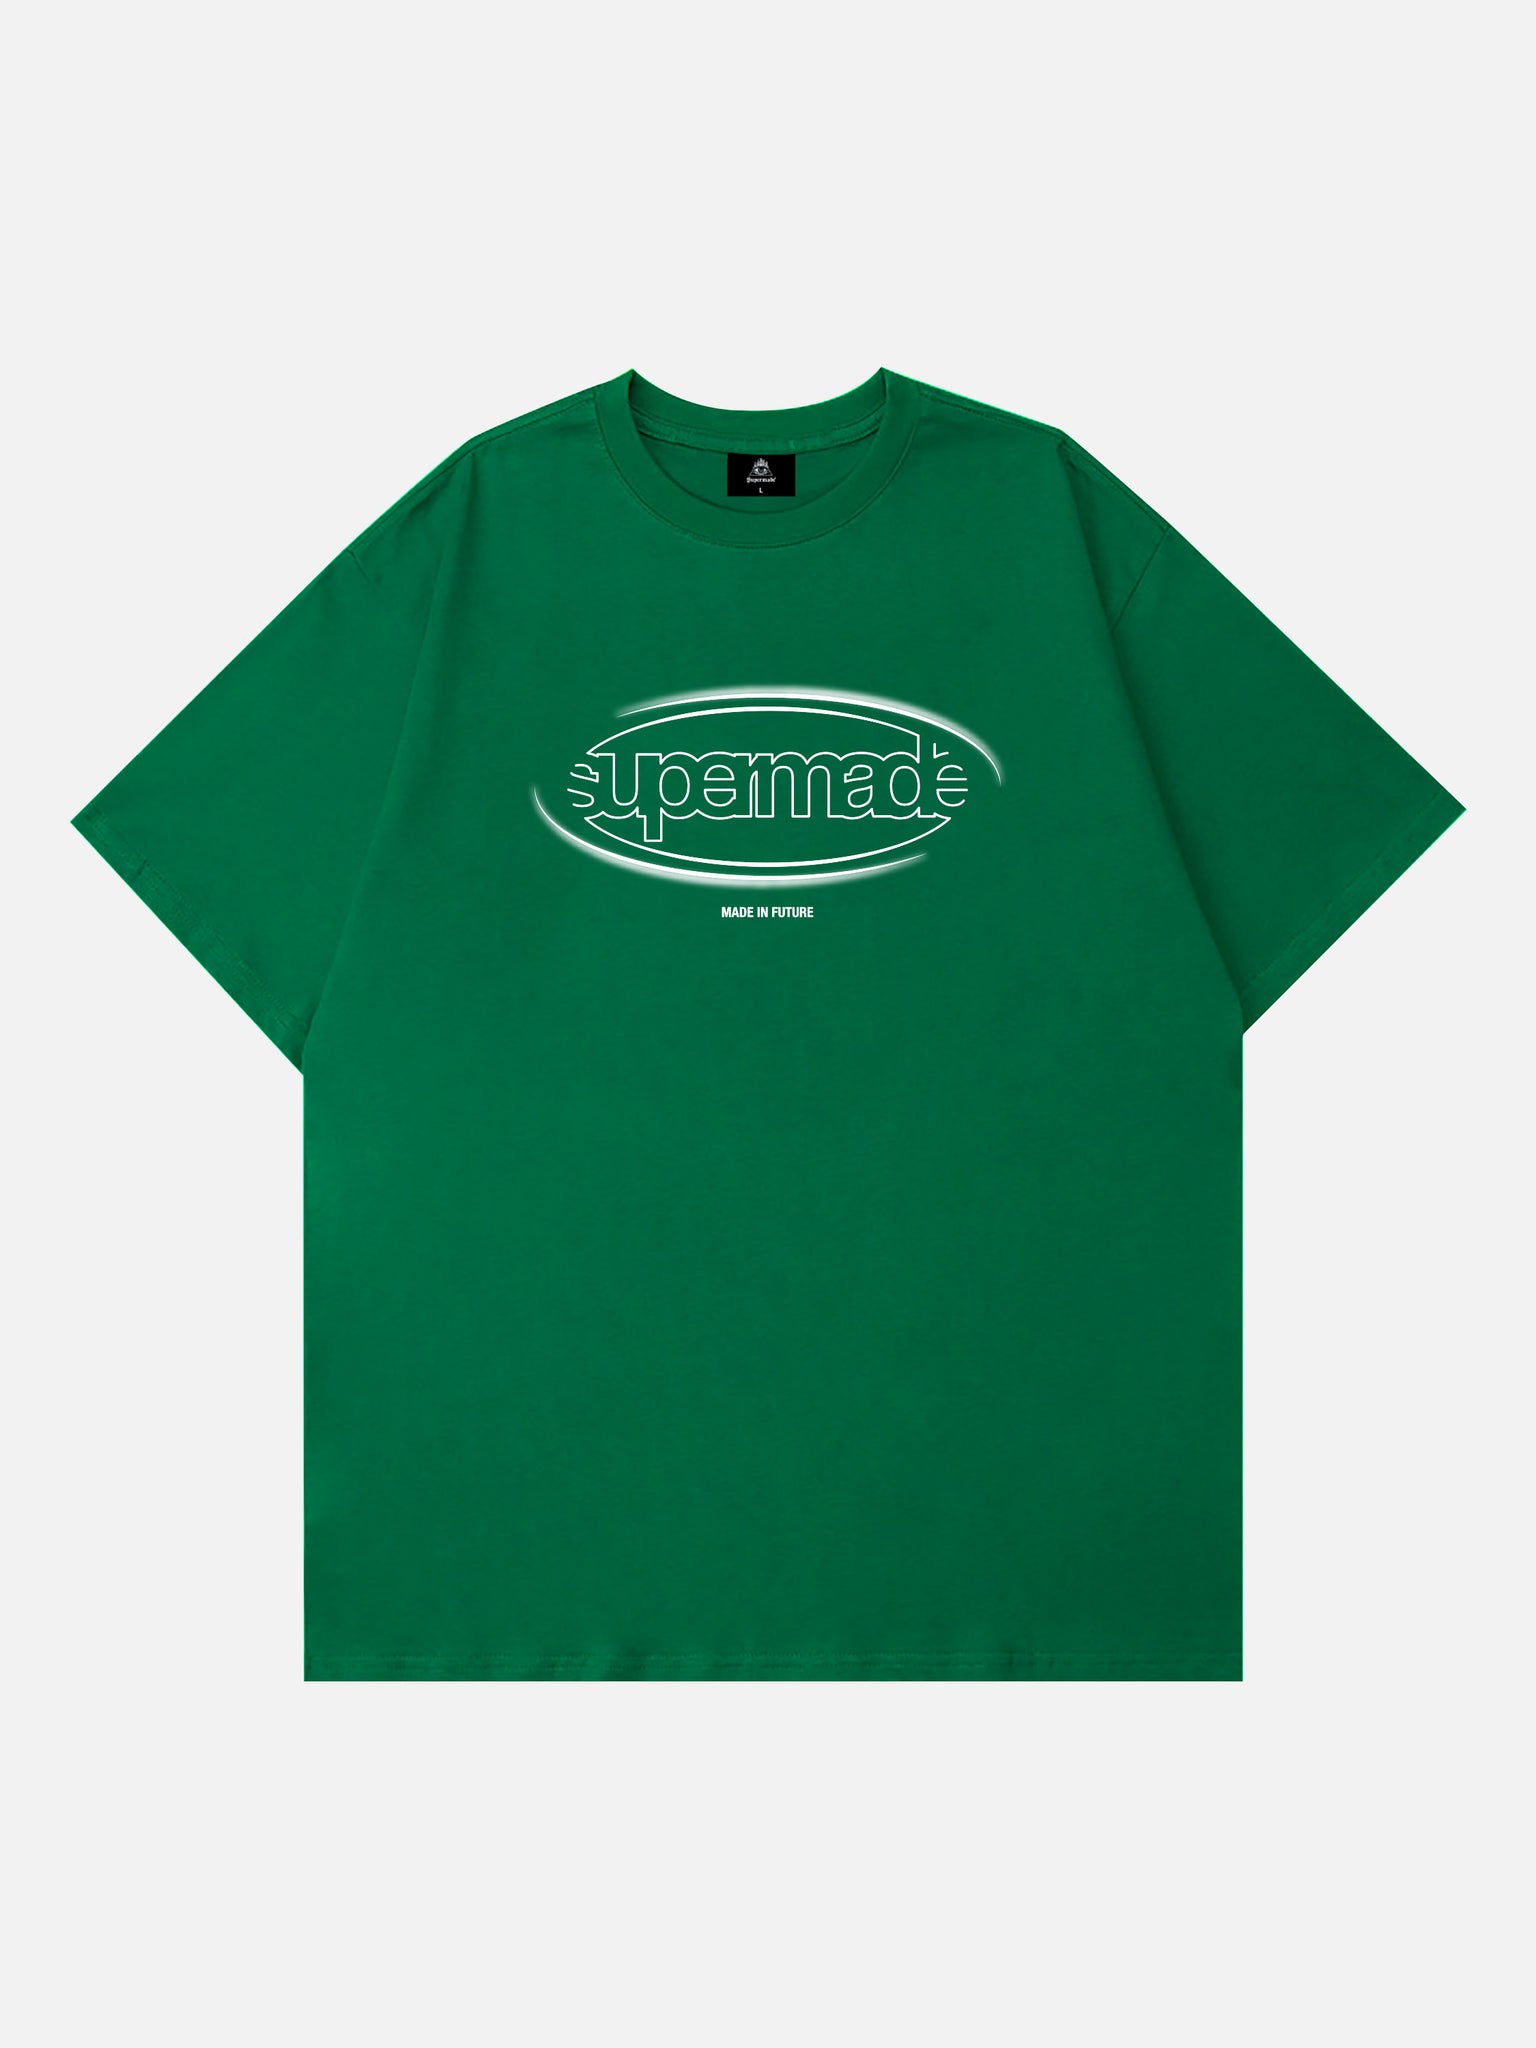 Thesupermade Oval Logo T-Shirt -1222